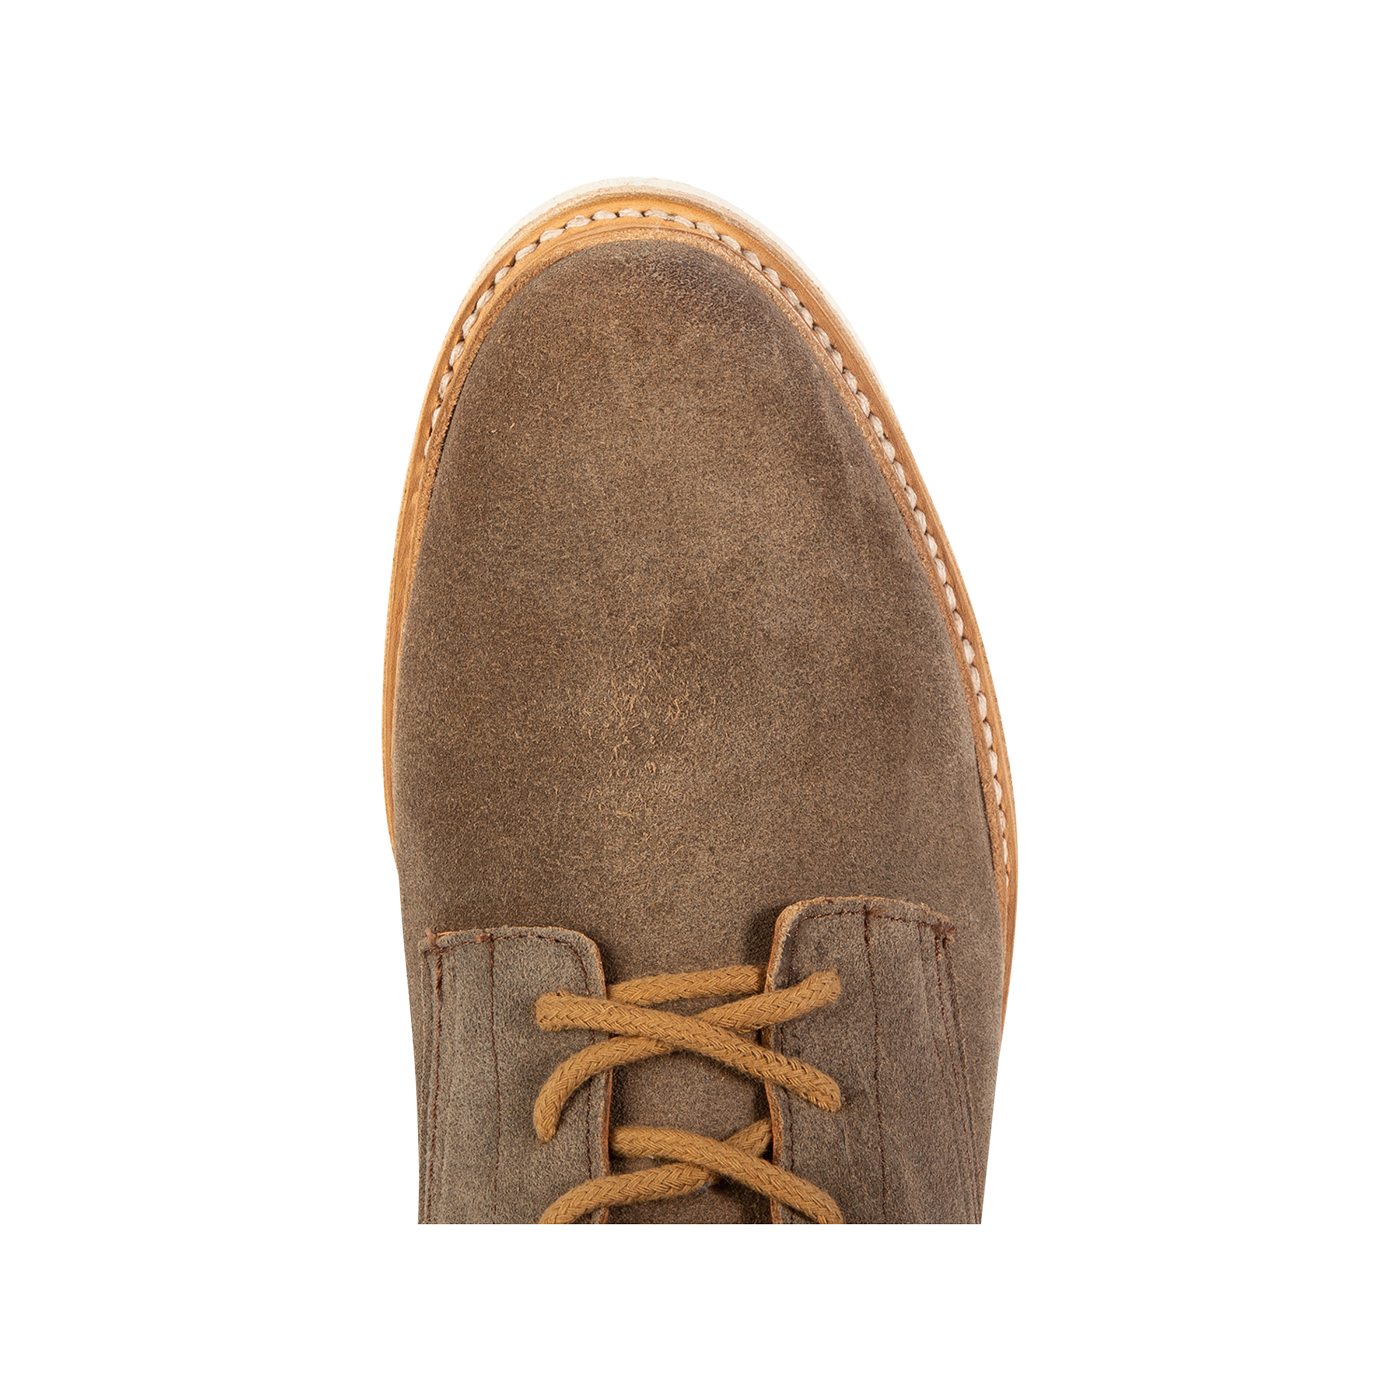 Top view showing almond toe and suede upper on FREEBIRD men's Wheeler taupe suede shoe